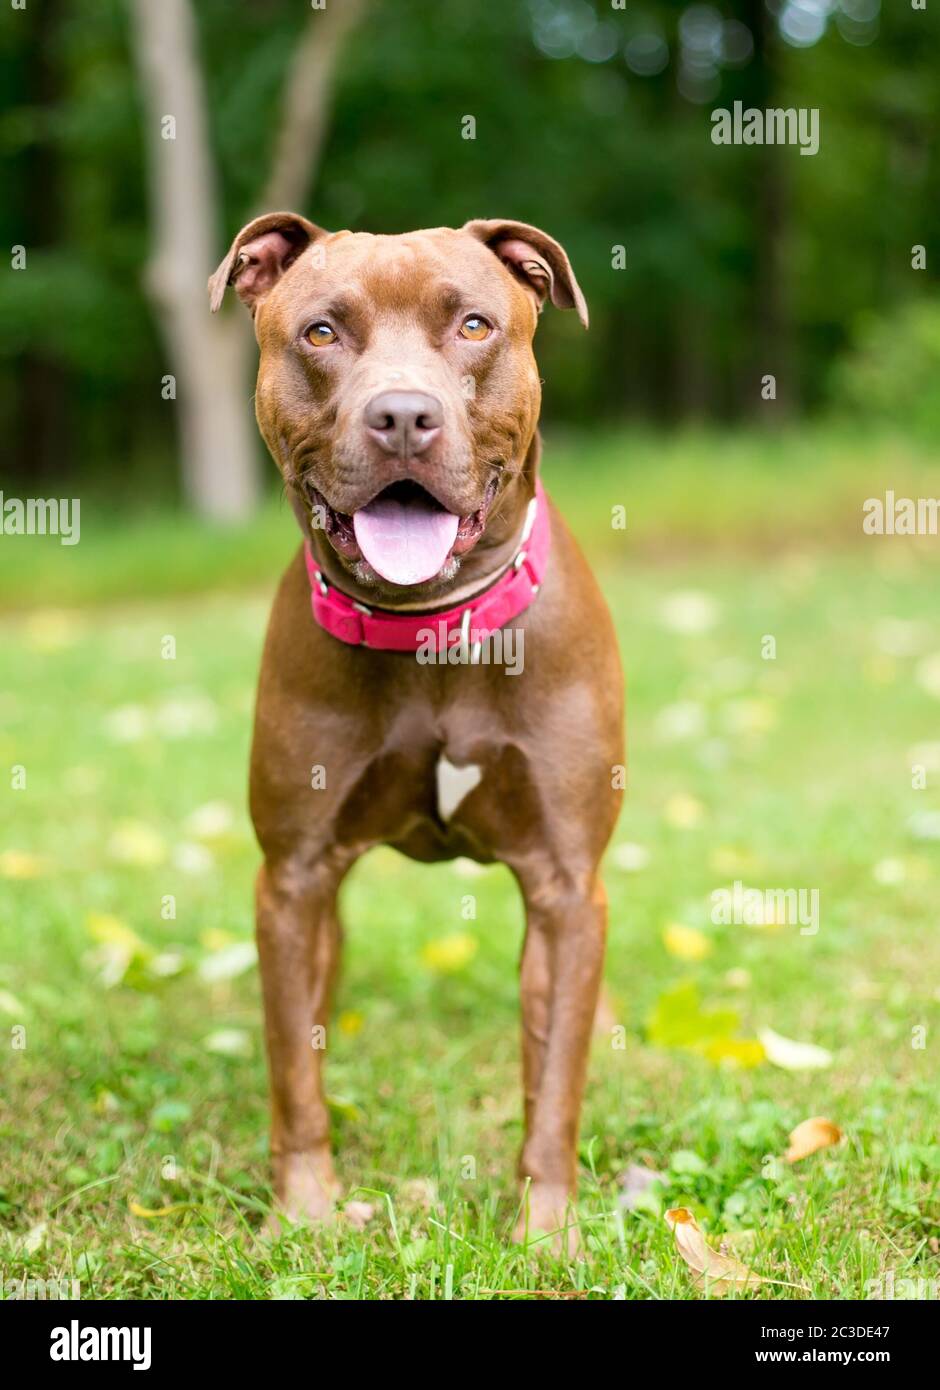 A Pit Bull Terrier X Labrador Retriever Mixed Breed Dog With A Happy